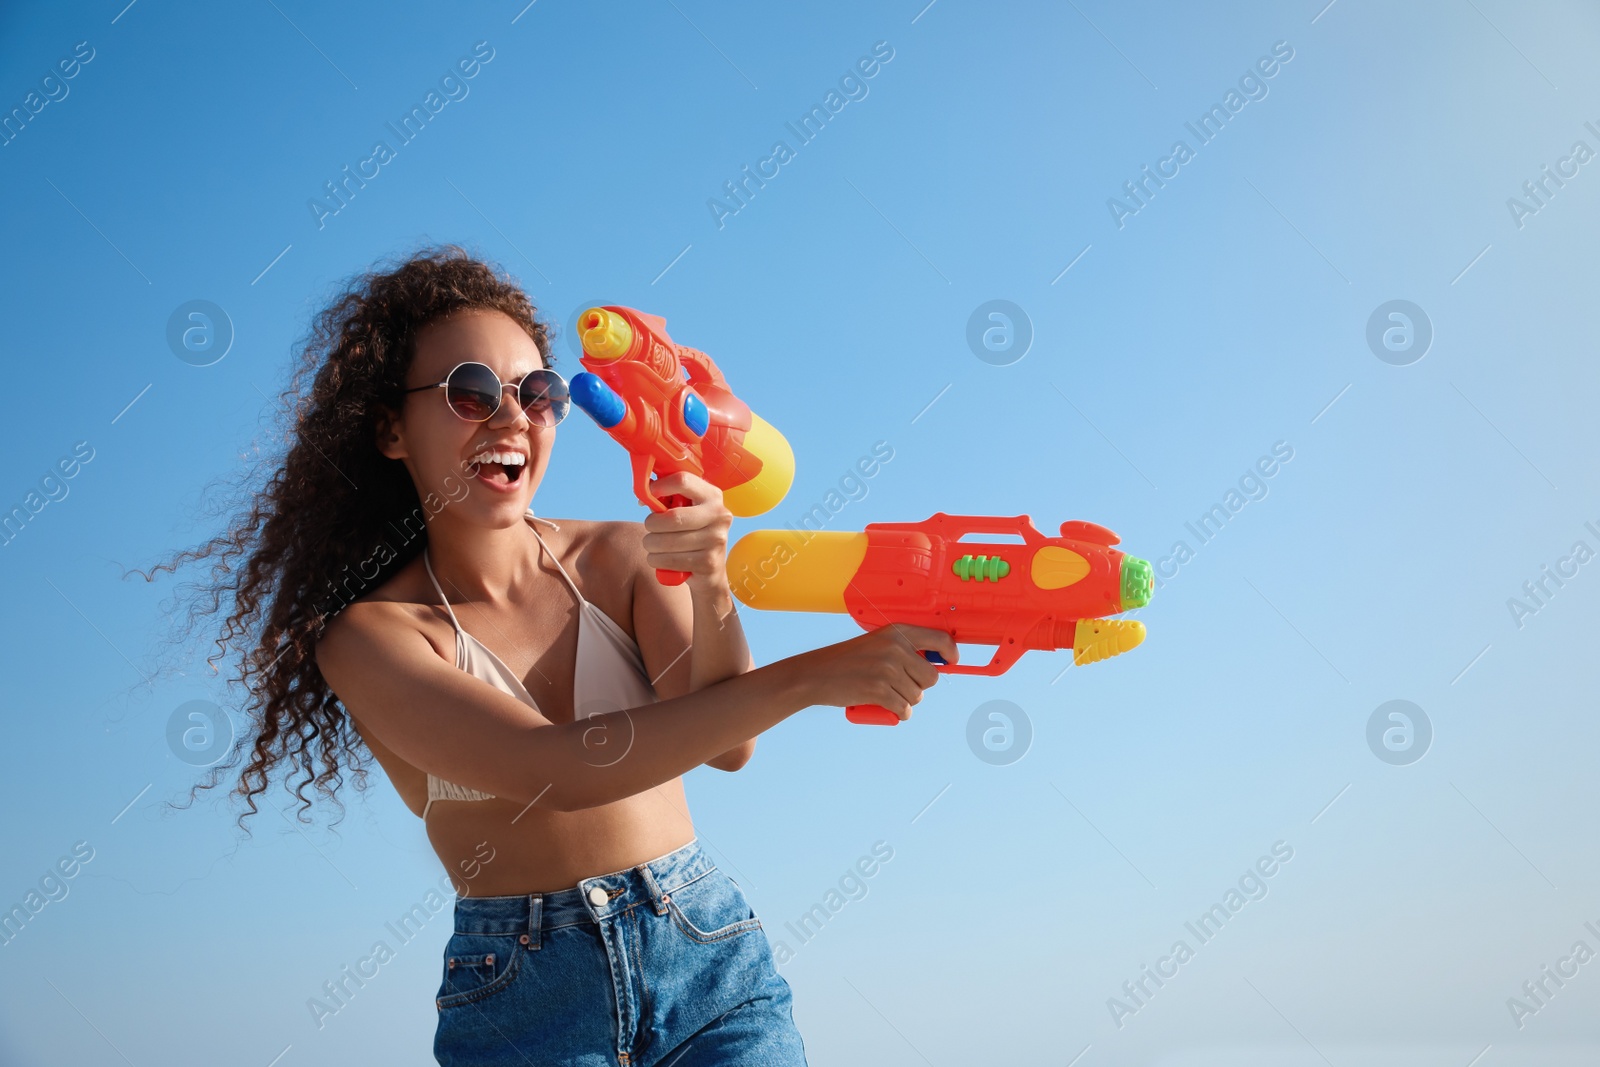 Photo of African American woman with water guns having fun against blue sky